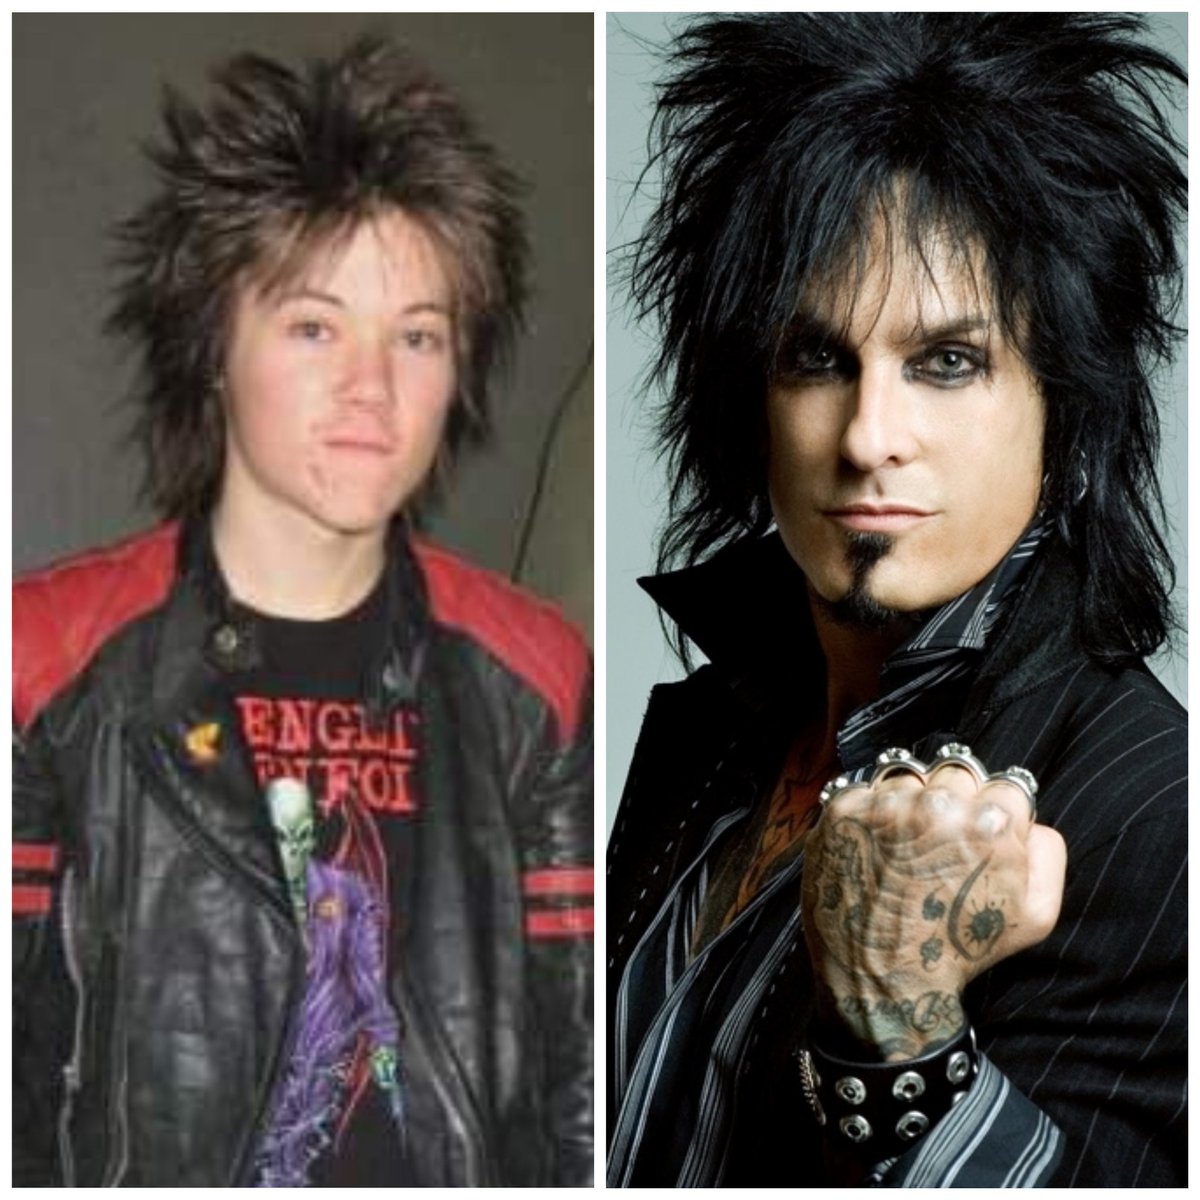 Back in 2009, when I was 15, I walked into a hairdresser with printed-at-home photos of @NikkiSixx (no smartphone), and asked her to do that (with hair barely long enough). I can't believe that tomorrow, I finally get to see Motley Crue